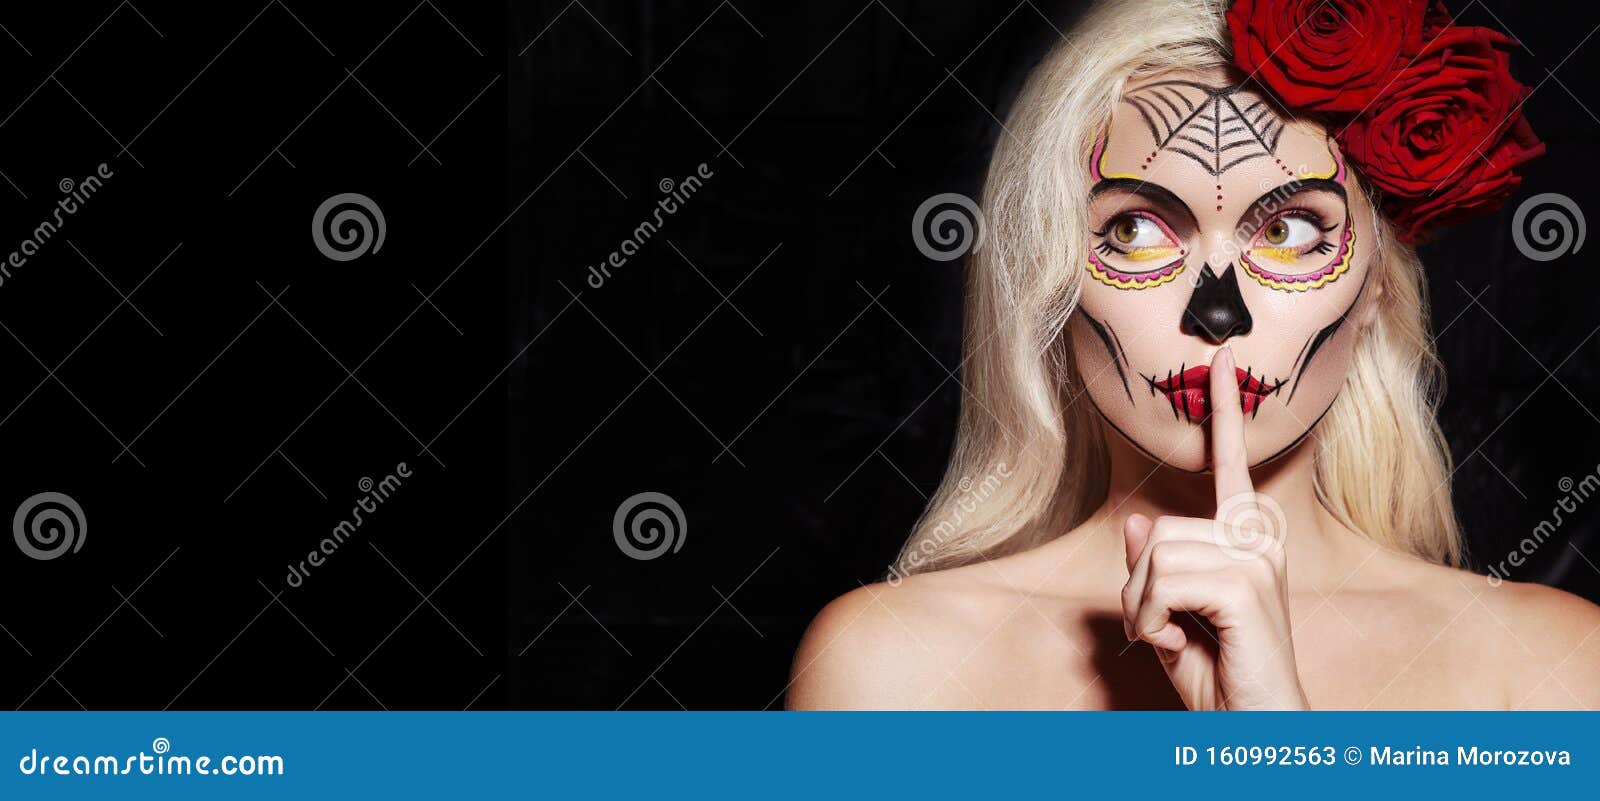 beautiful halloween make-up style. blond model wear sugar skull makeup with red roses. santa muerte concept